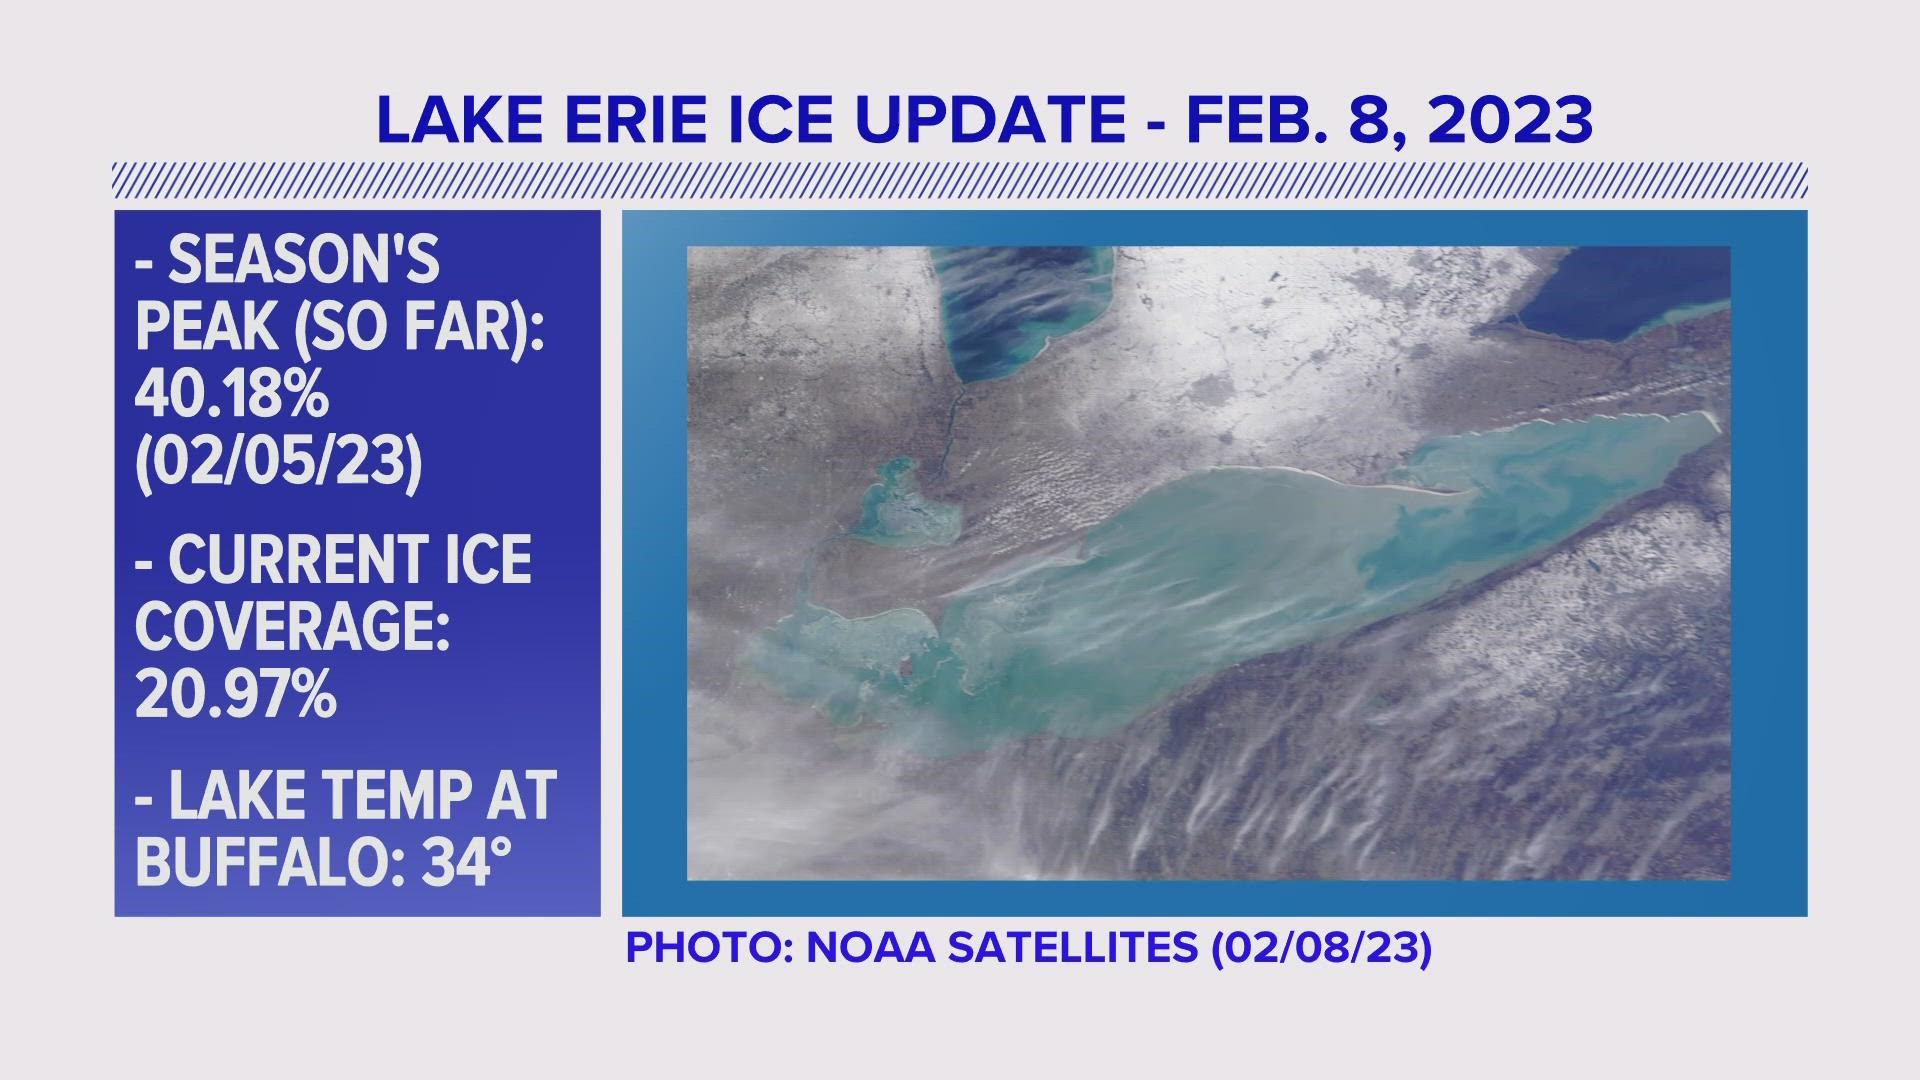 After an impressive increase of ice coverage after the arctic blast, the ice has began to dwindle once again this week.